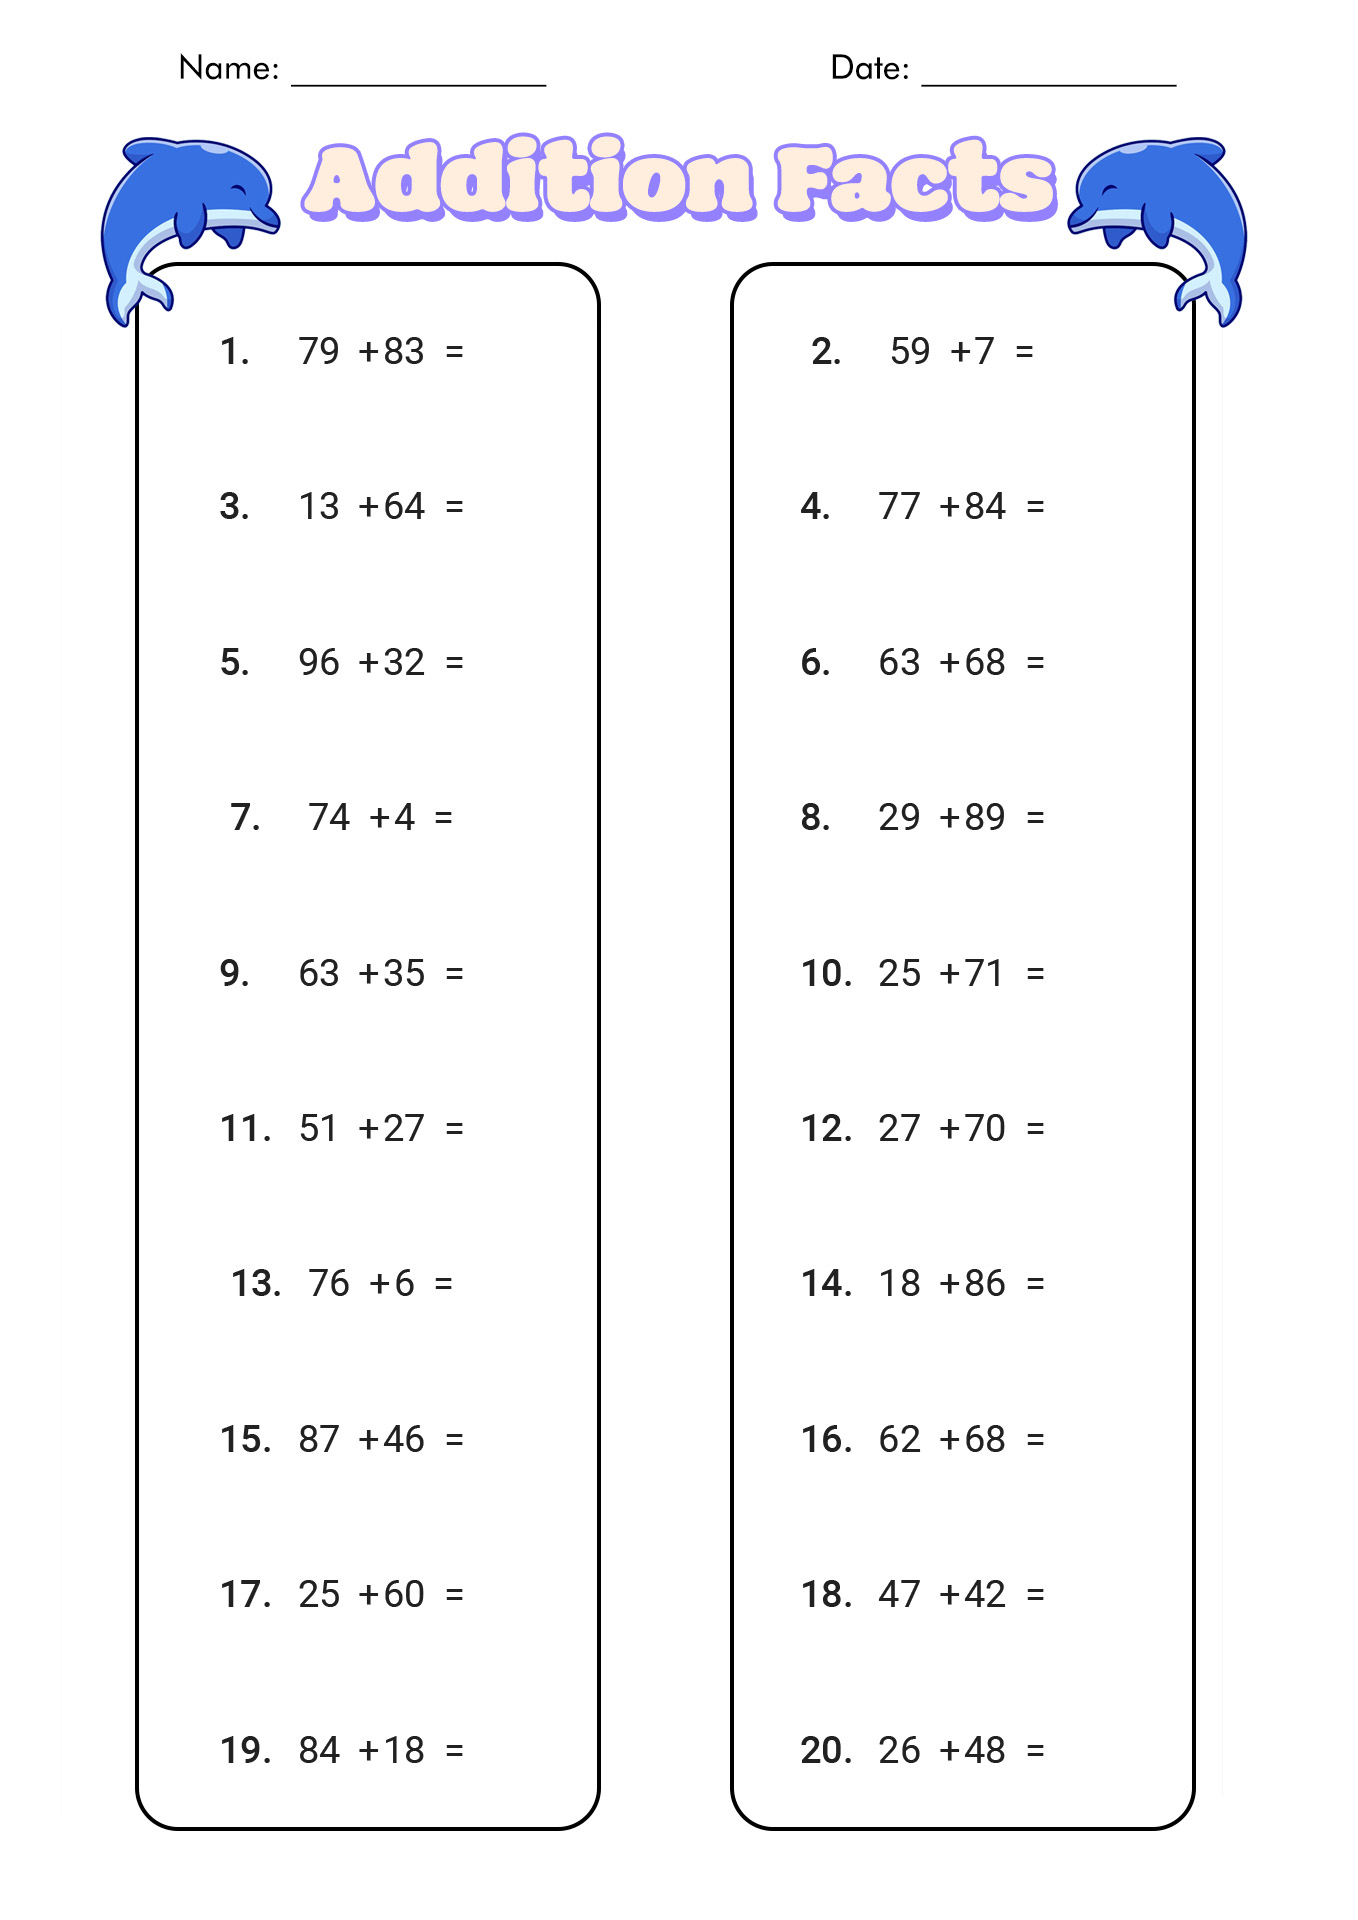 Addition Facts Worksheets